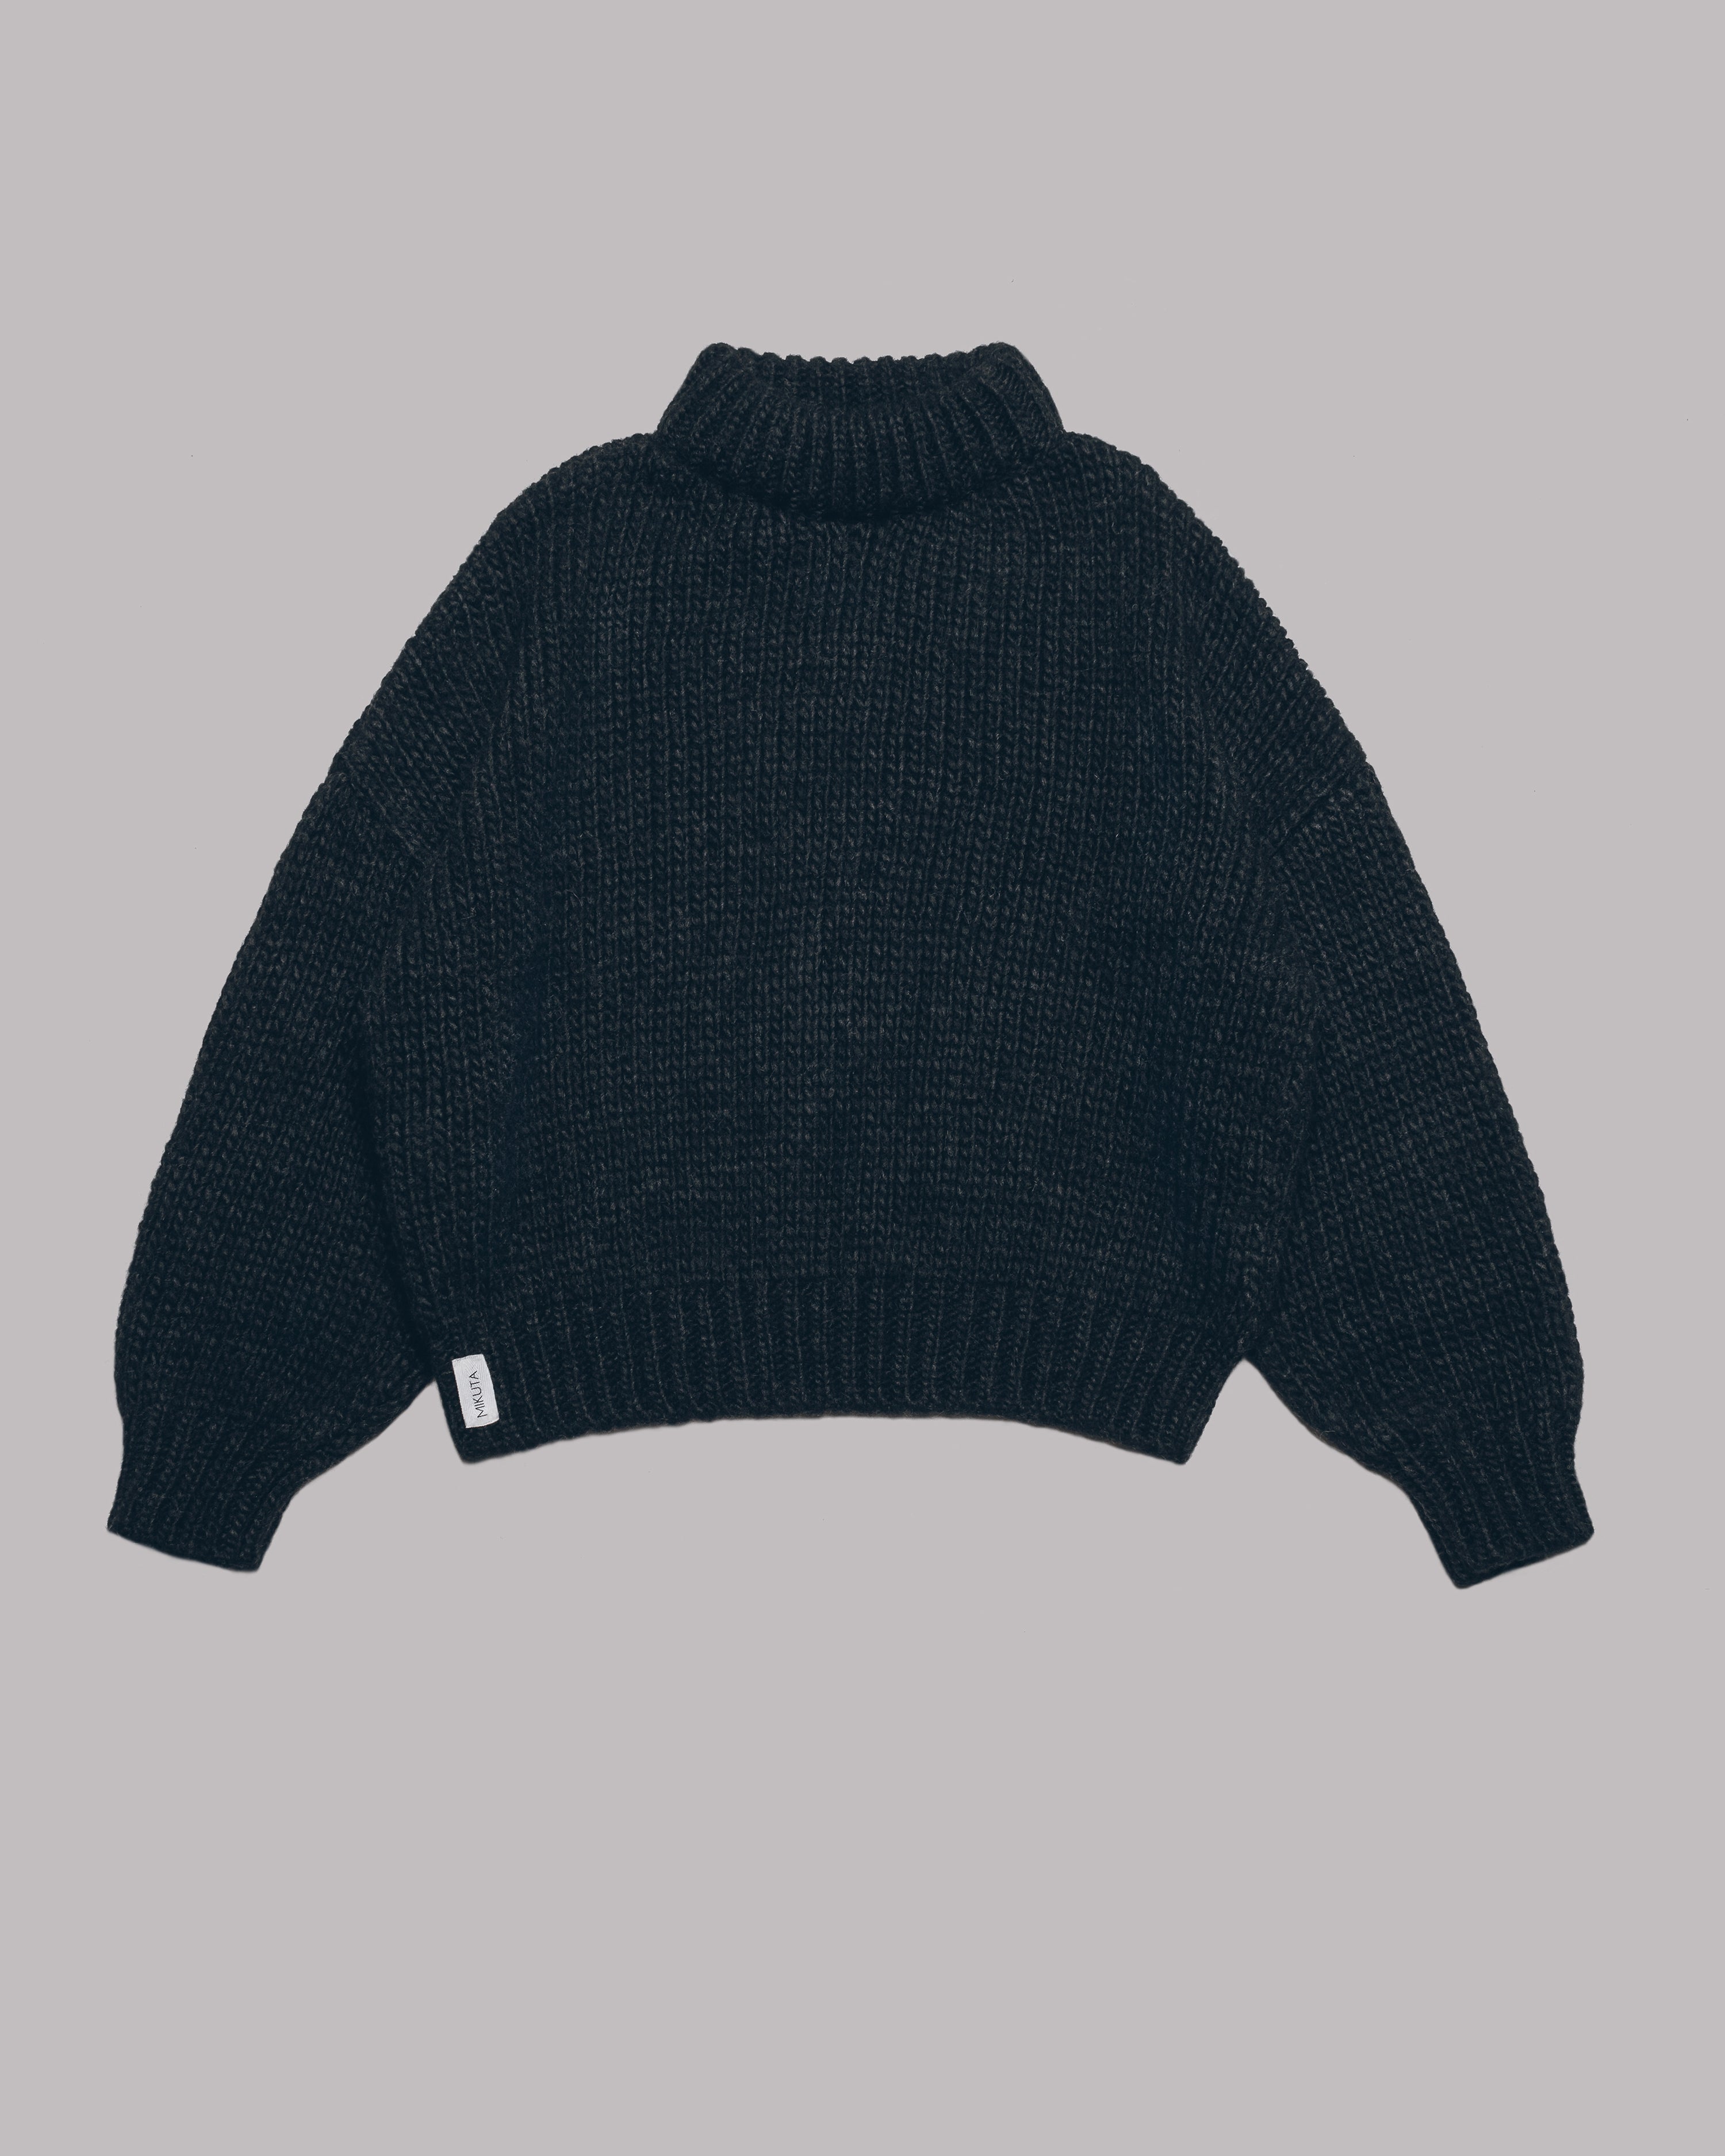 The Dark Knitted Sweater